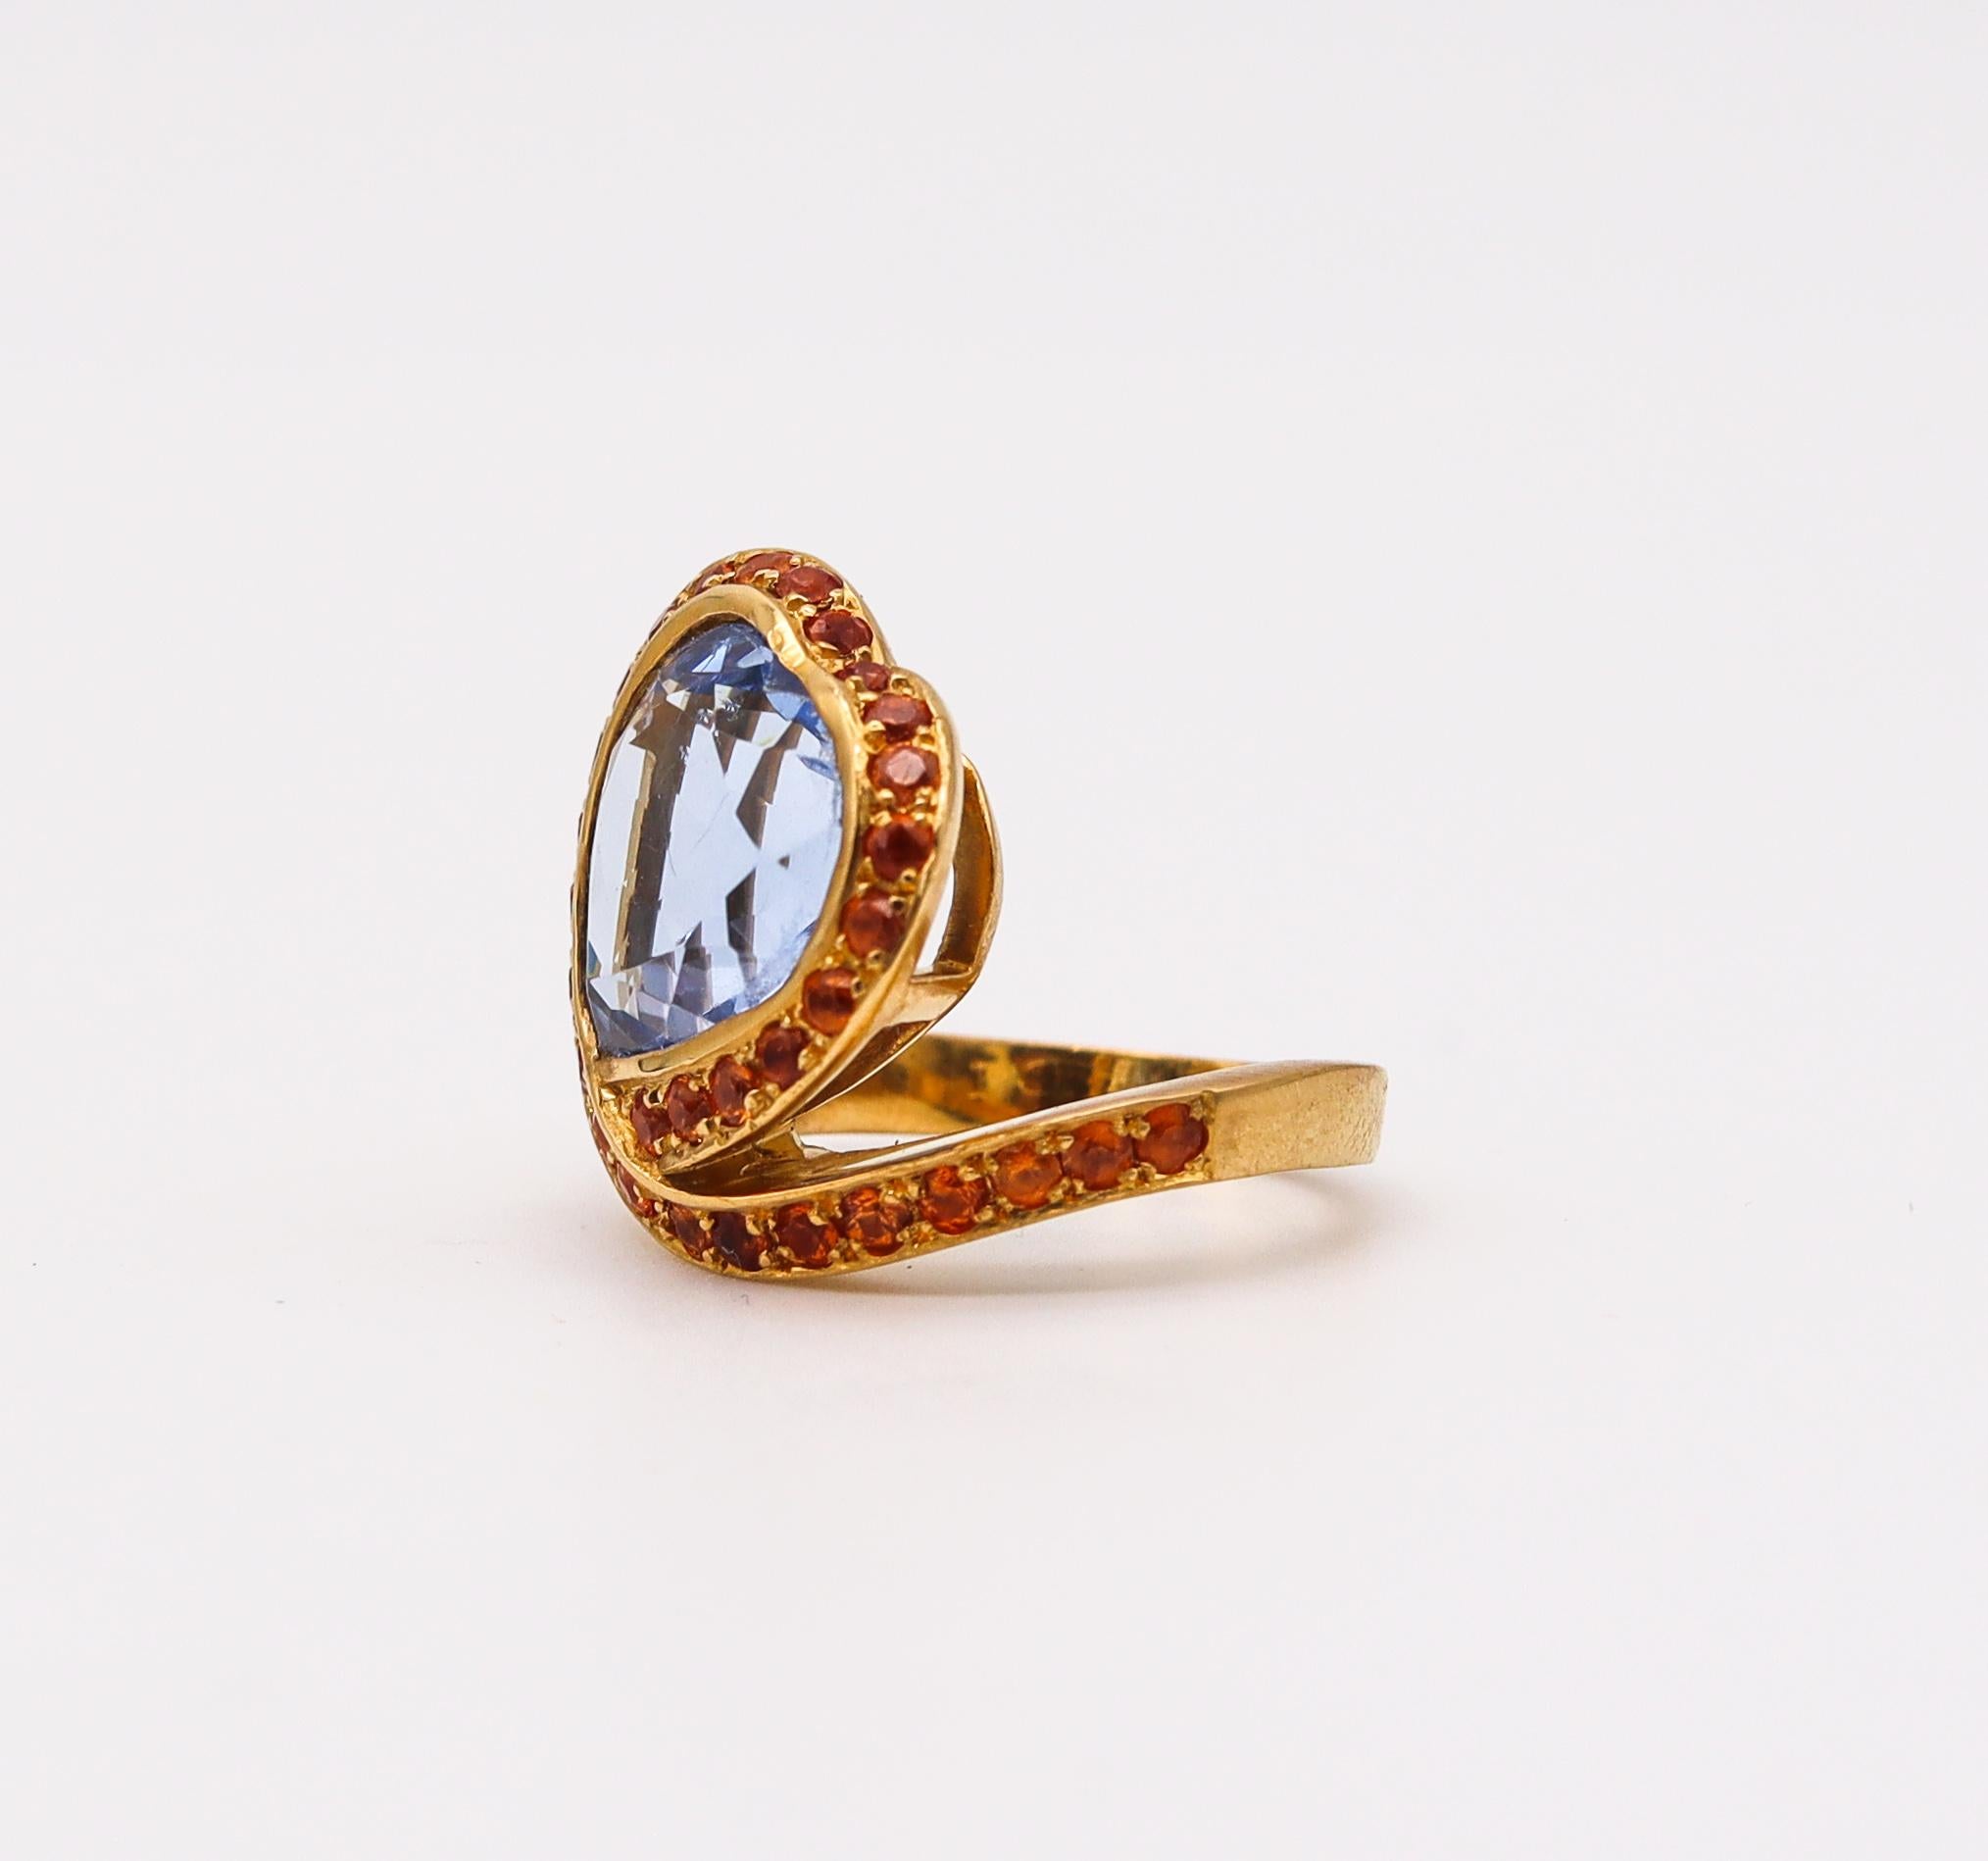 Heart Cut Nardi Venice Cocktail Ring in 18kt Gold with 10.83 Cts Aquamarine & Spessartite